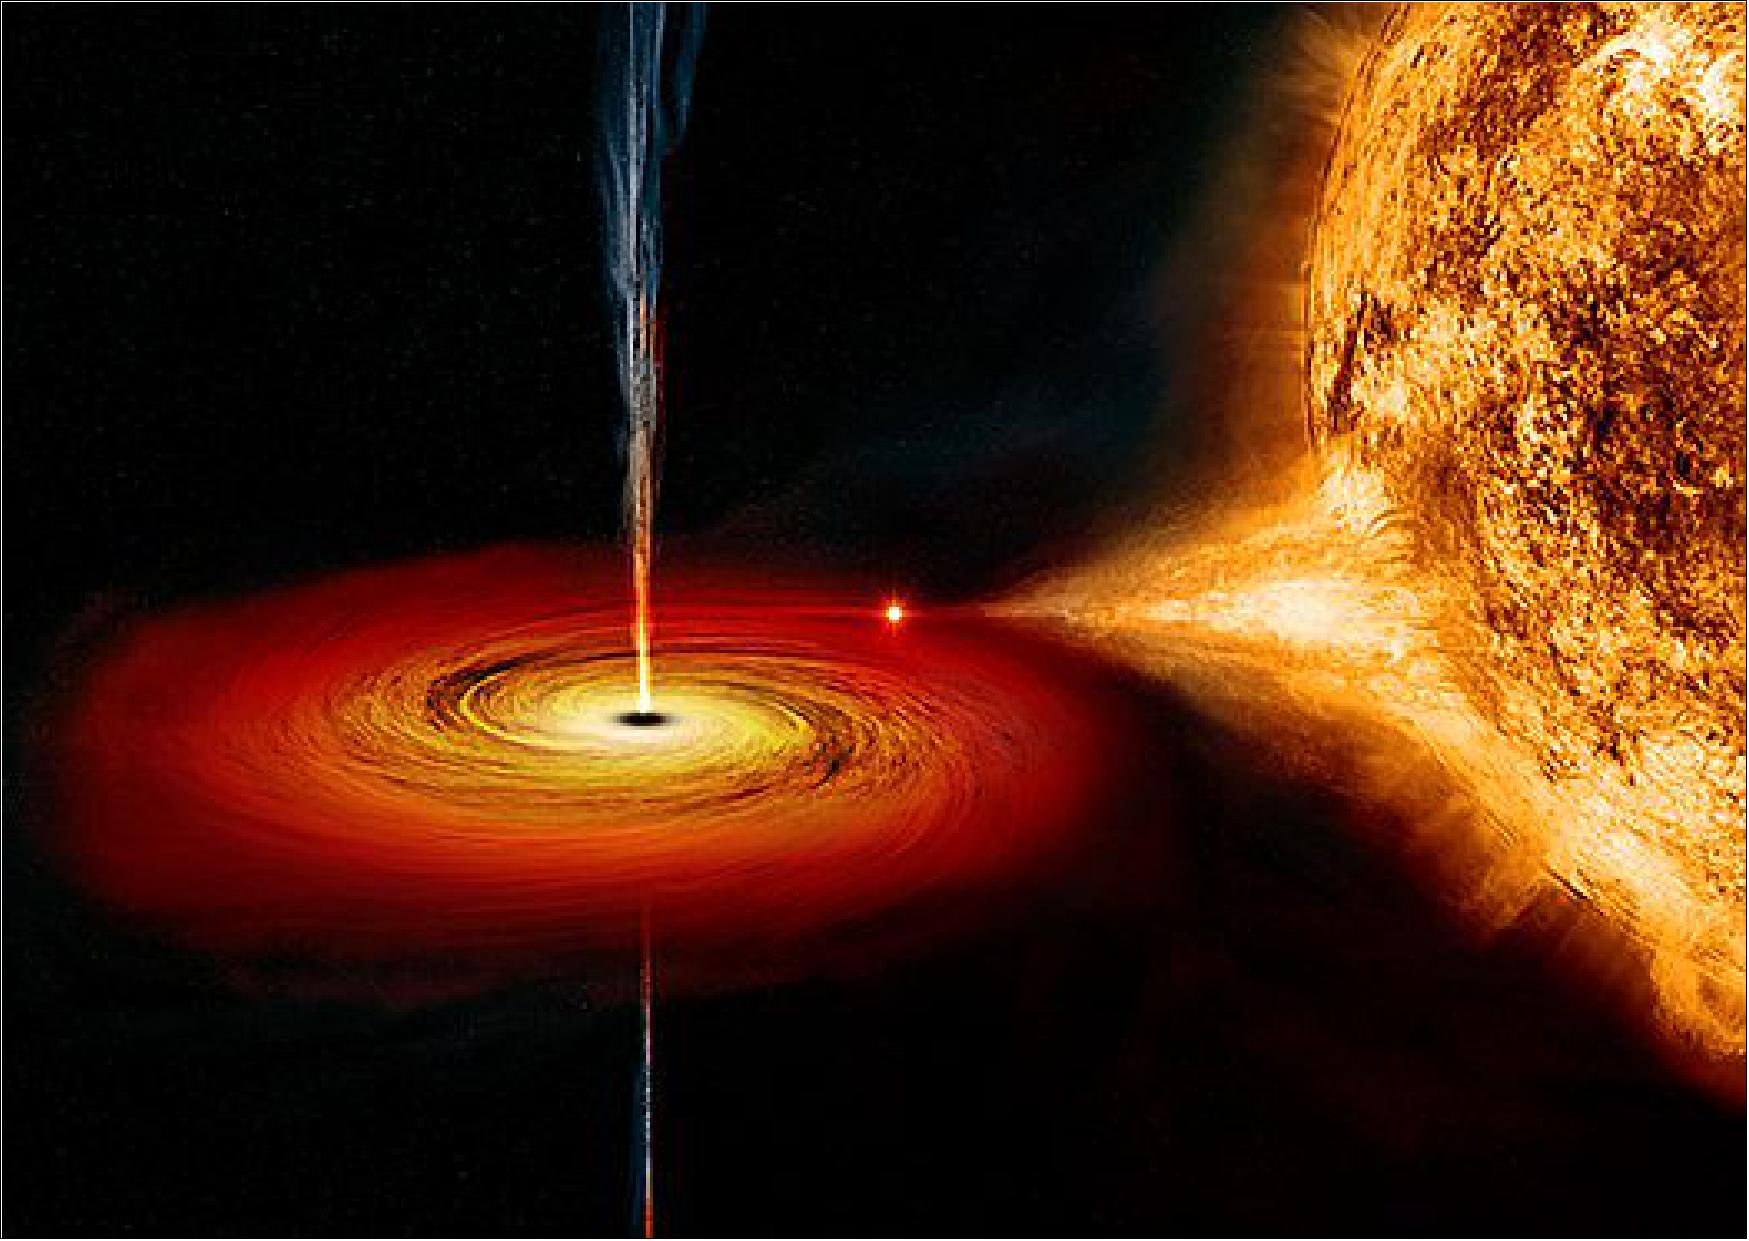 Figure 24: Illustration of a black hole accreting matter from a companion star as jets blast away from the black hole (image credit: NASA/CXC/M. Weiss)